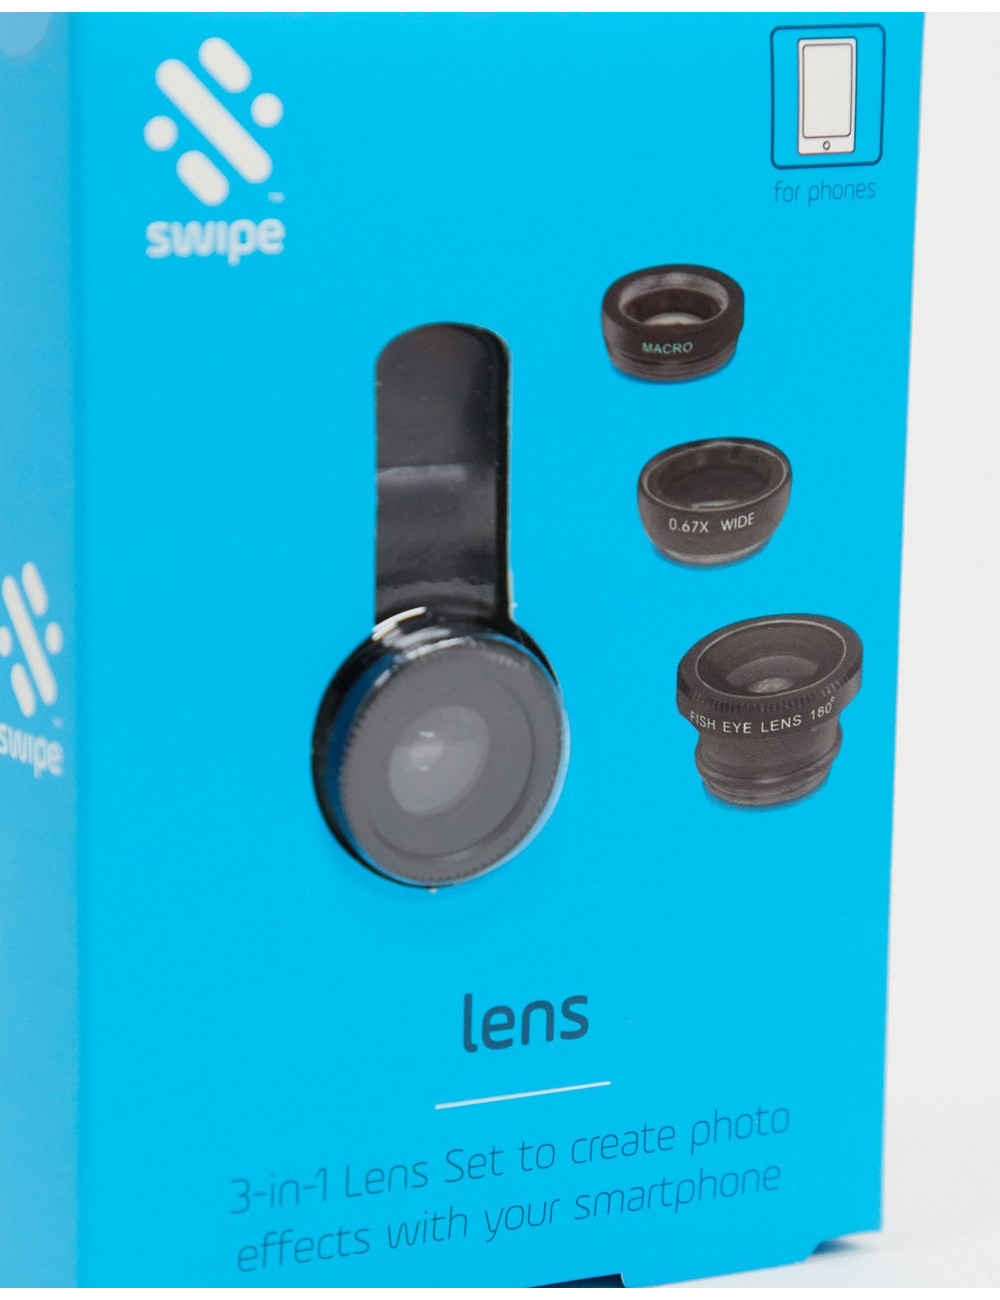 Thumbs Up 3-In-1 lens set